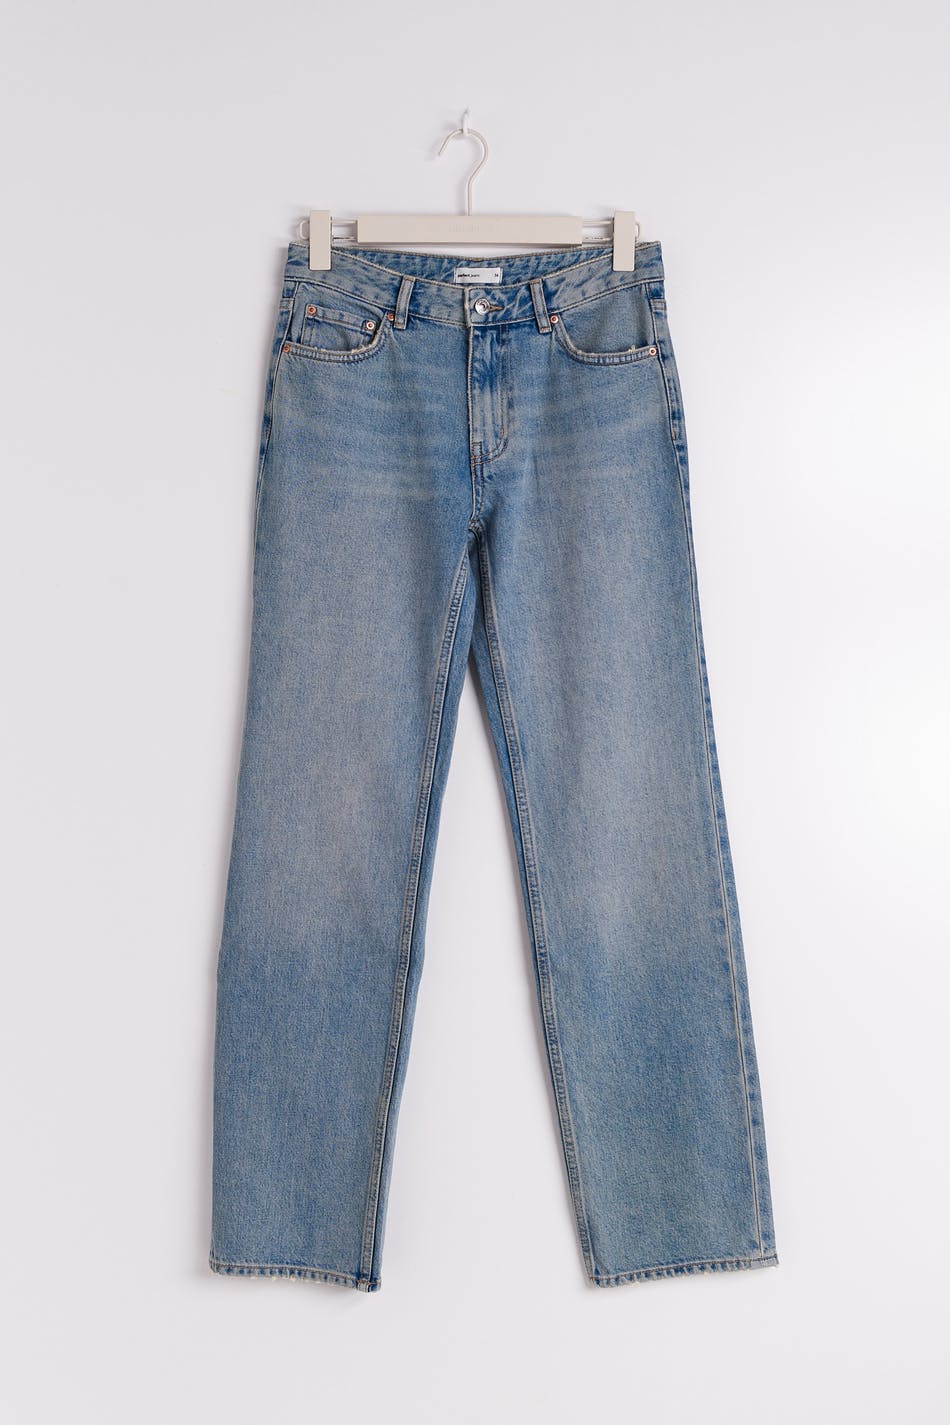 Gina Tricot - Low straight tall jeans - low waist jeans - Blue - 38 - Female